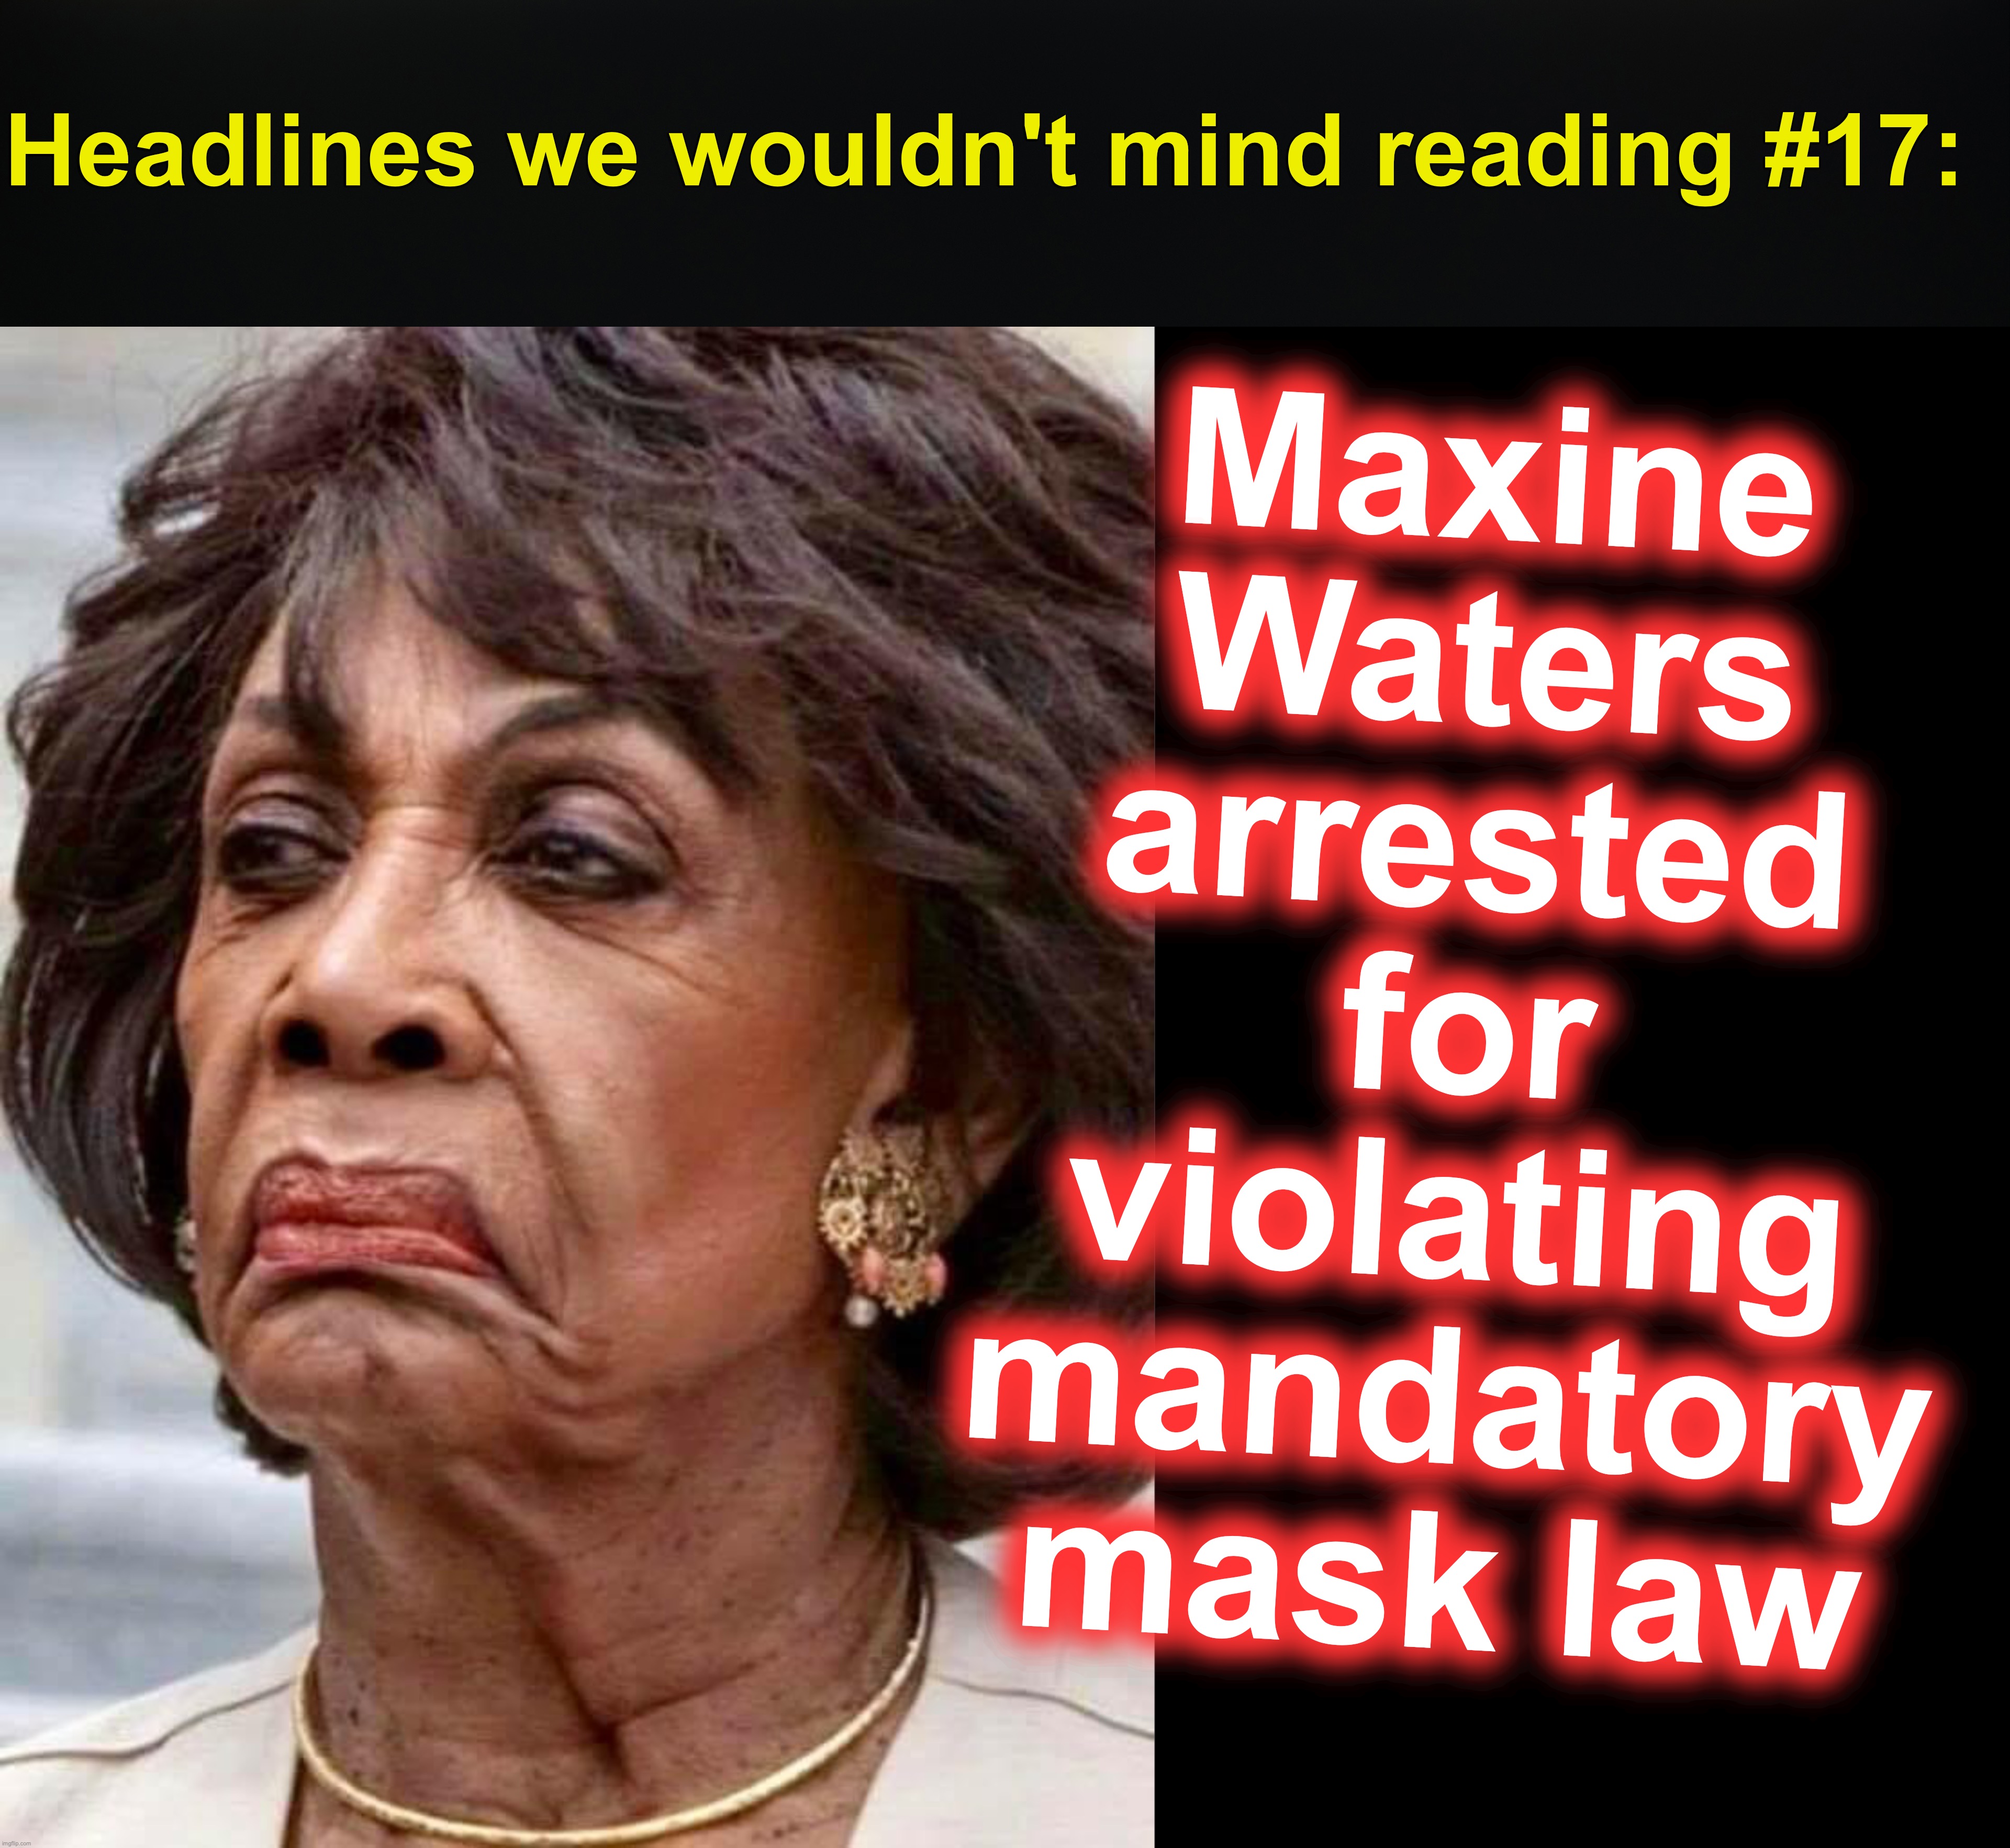 Maxine Waters arrested for violating mandatory mask law; Headlines we wouldn't mind reading #17: | image tagged in maxine waters,covid-19,coronavirus,corona | made w/ Imgflip meme maker